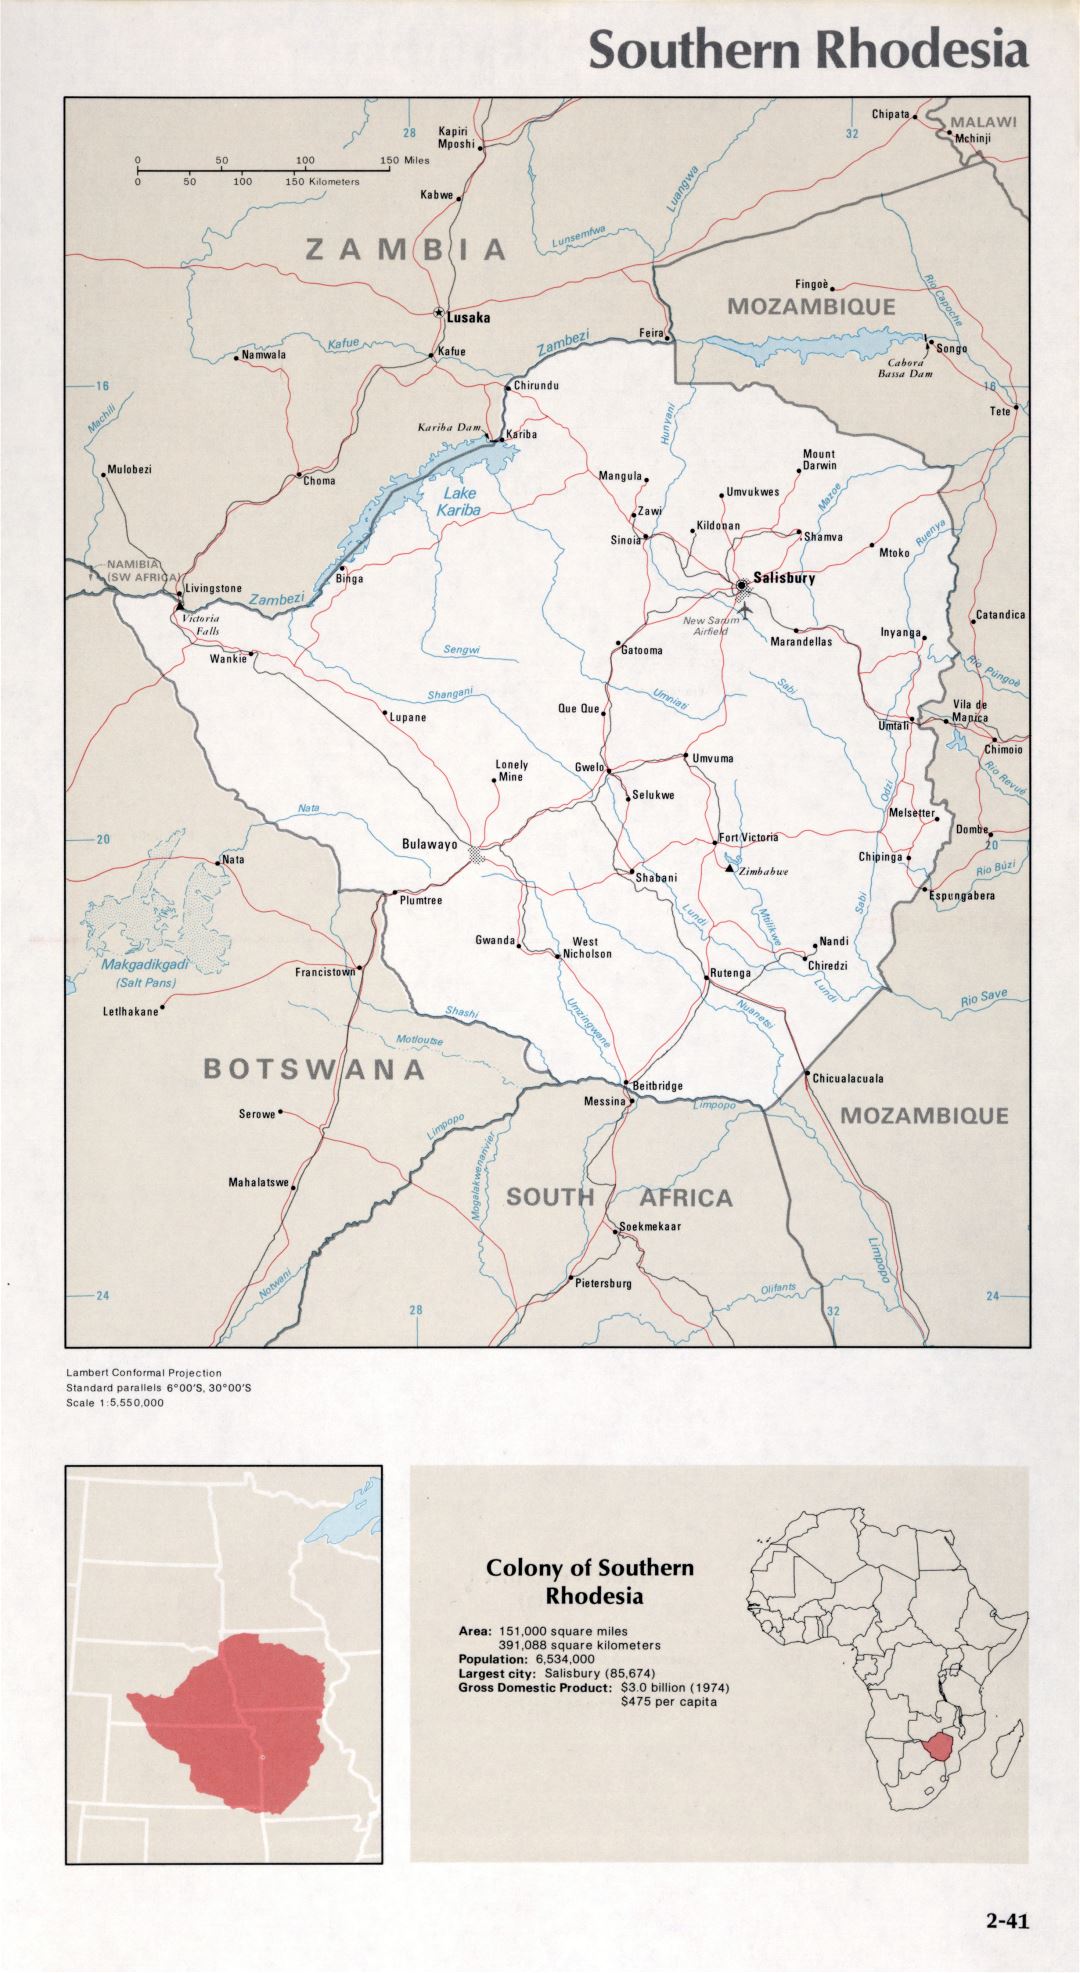 Map of Southern Rhodesia (2-41)